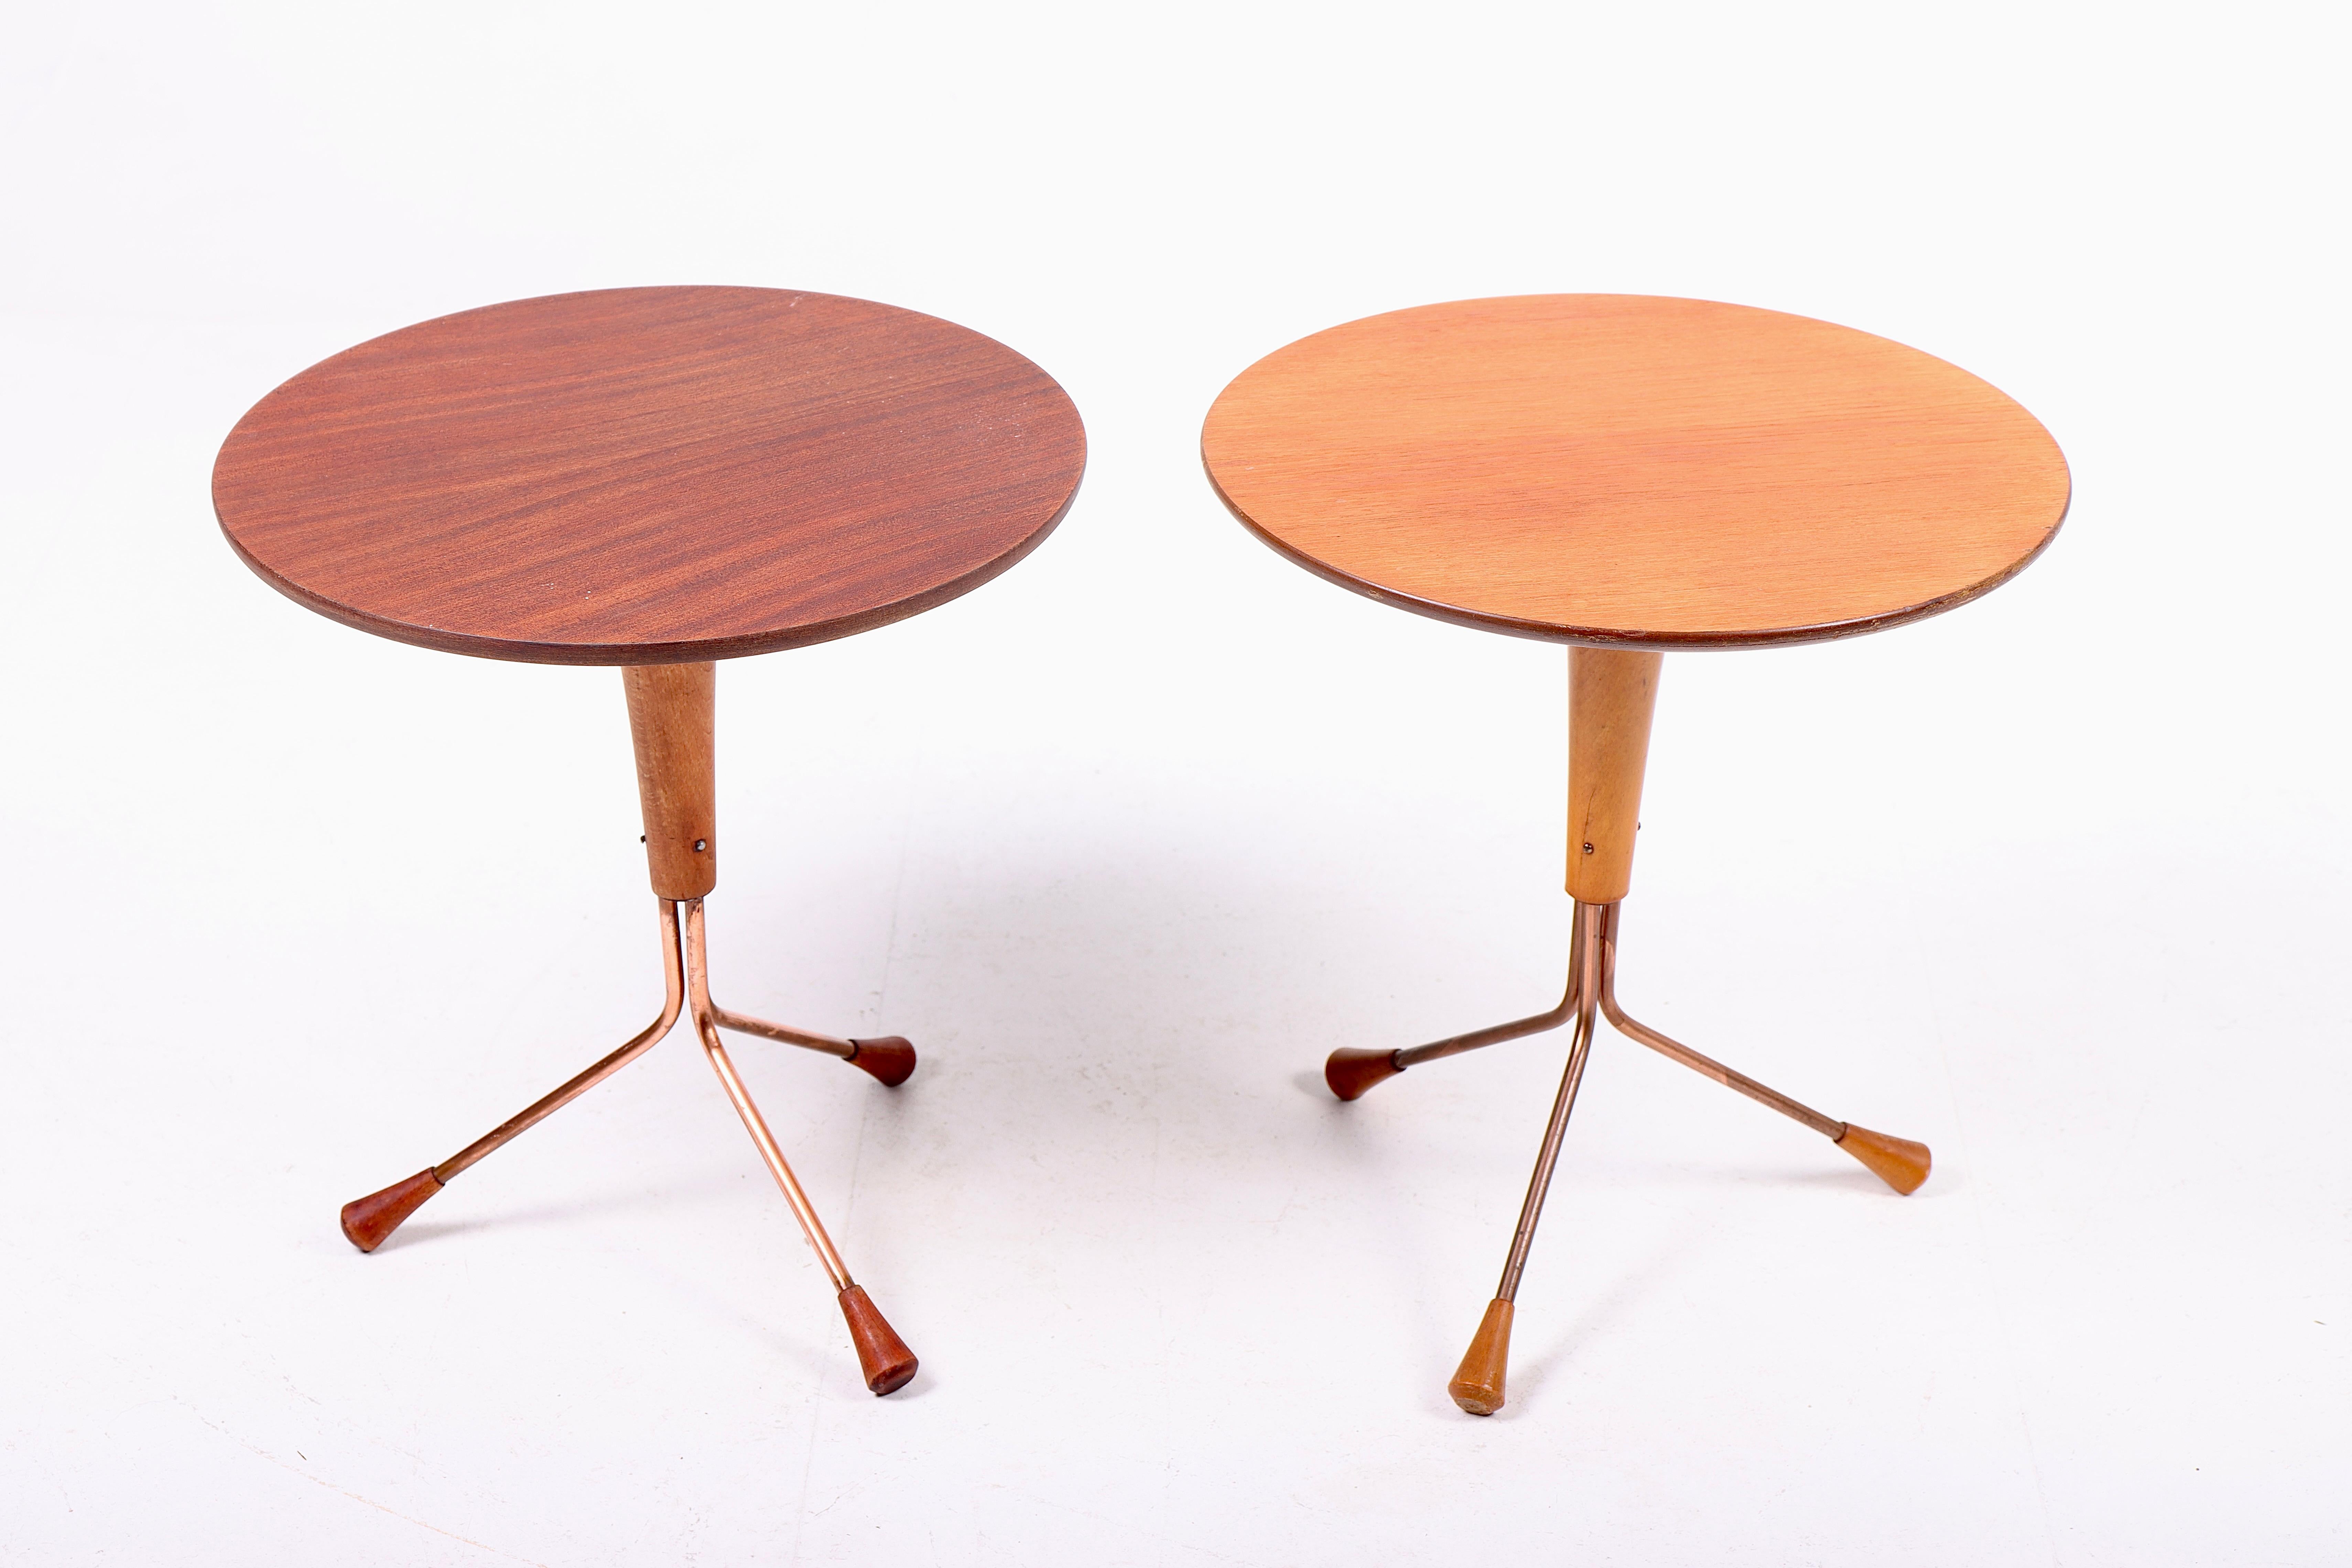 Two side tables in teak and mahogany, designed by Albert Larsson for Alberts Tibro. Made in Sweden in the 1960s. Great original condition.